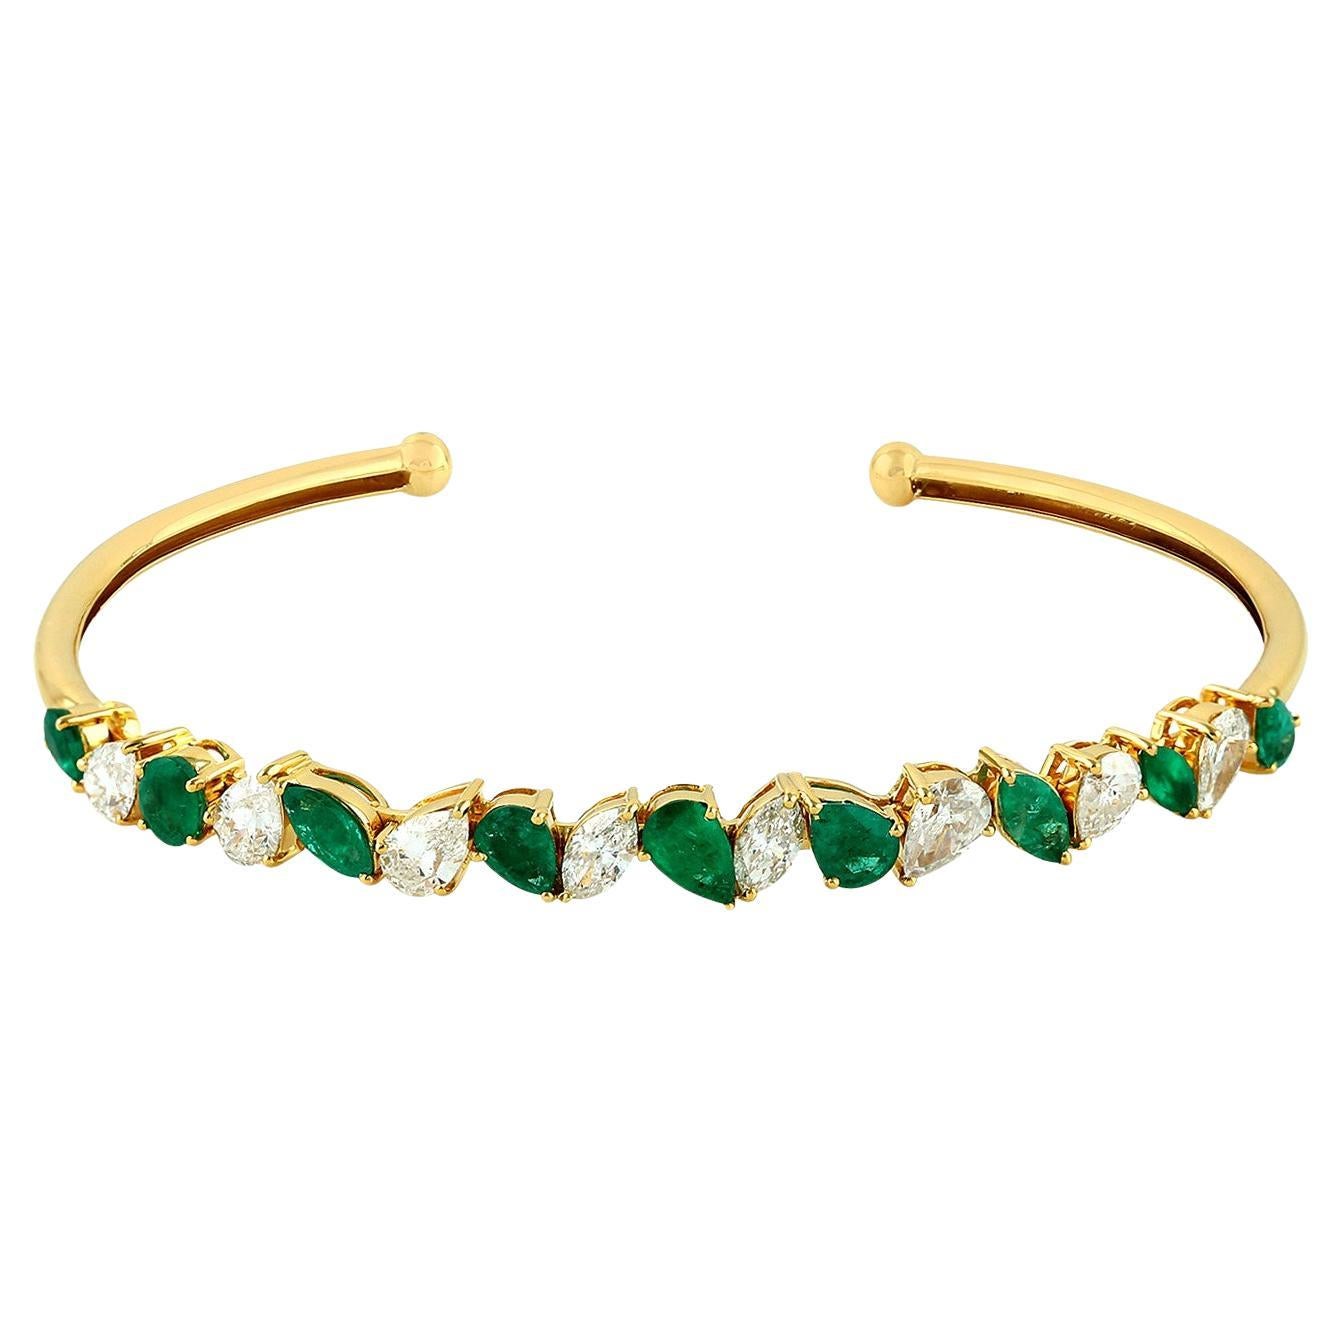 Marquise Shaped Emerald & Diamond Bangle Made In 18k Gold